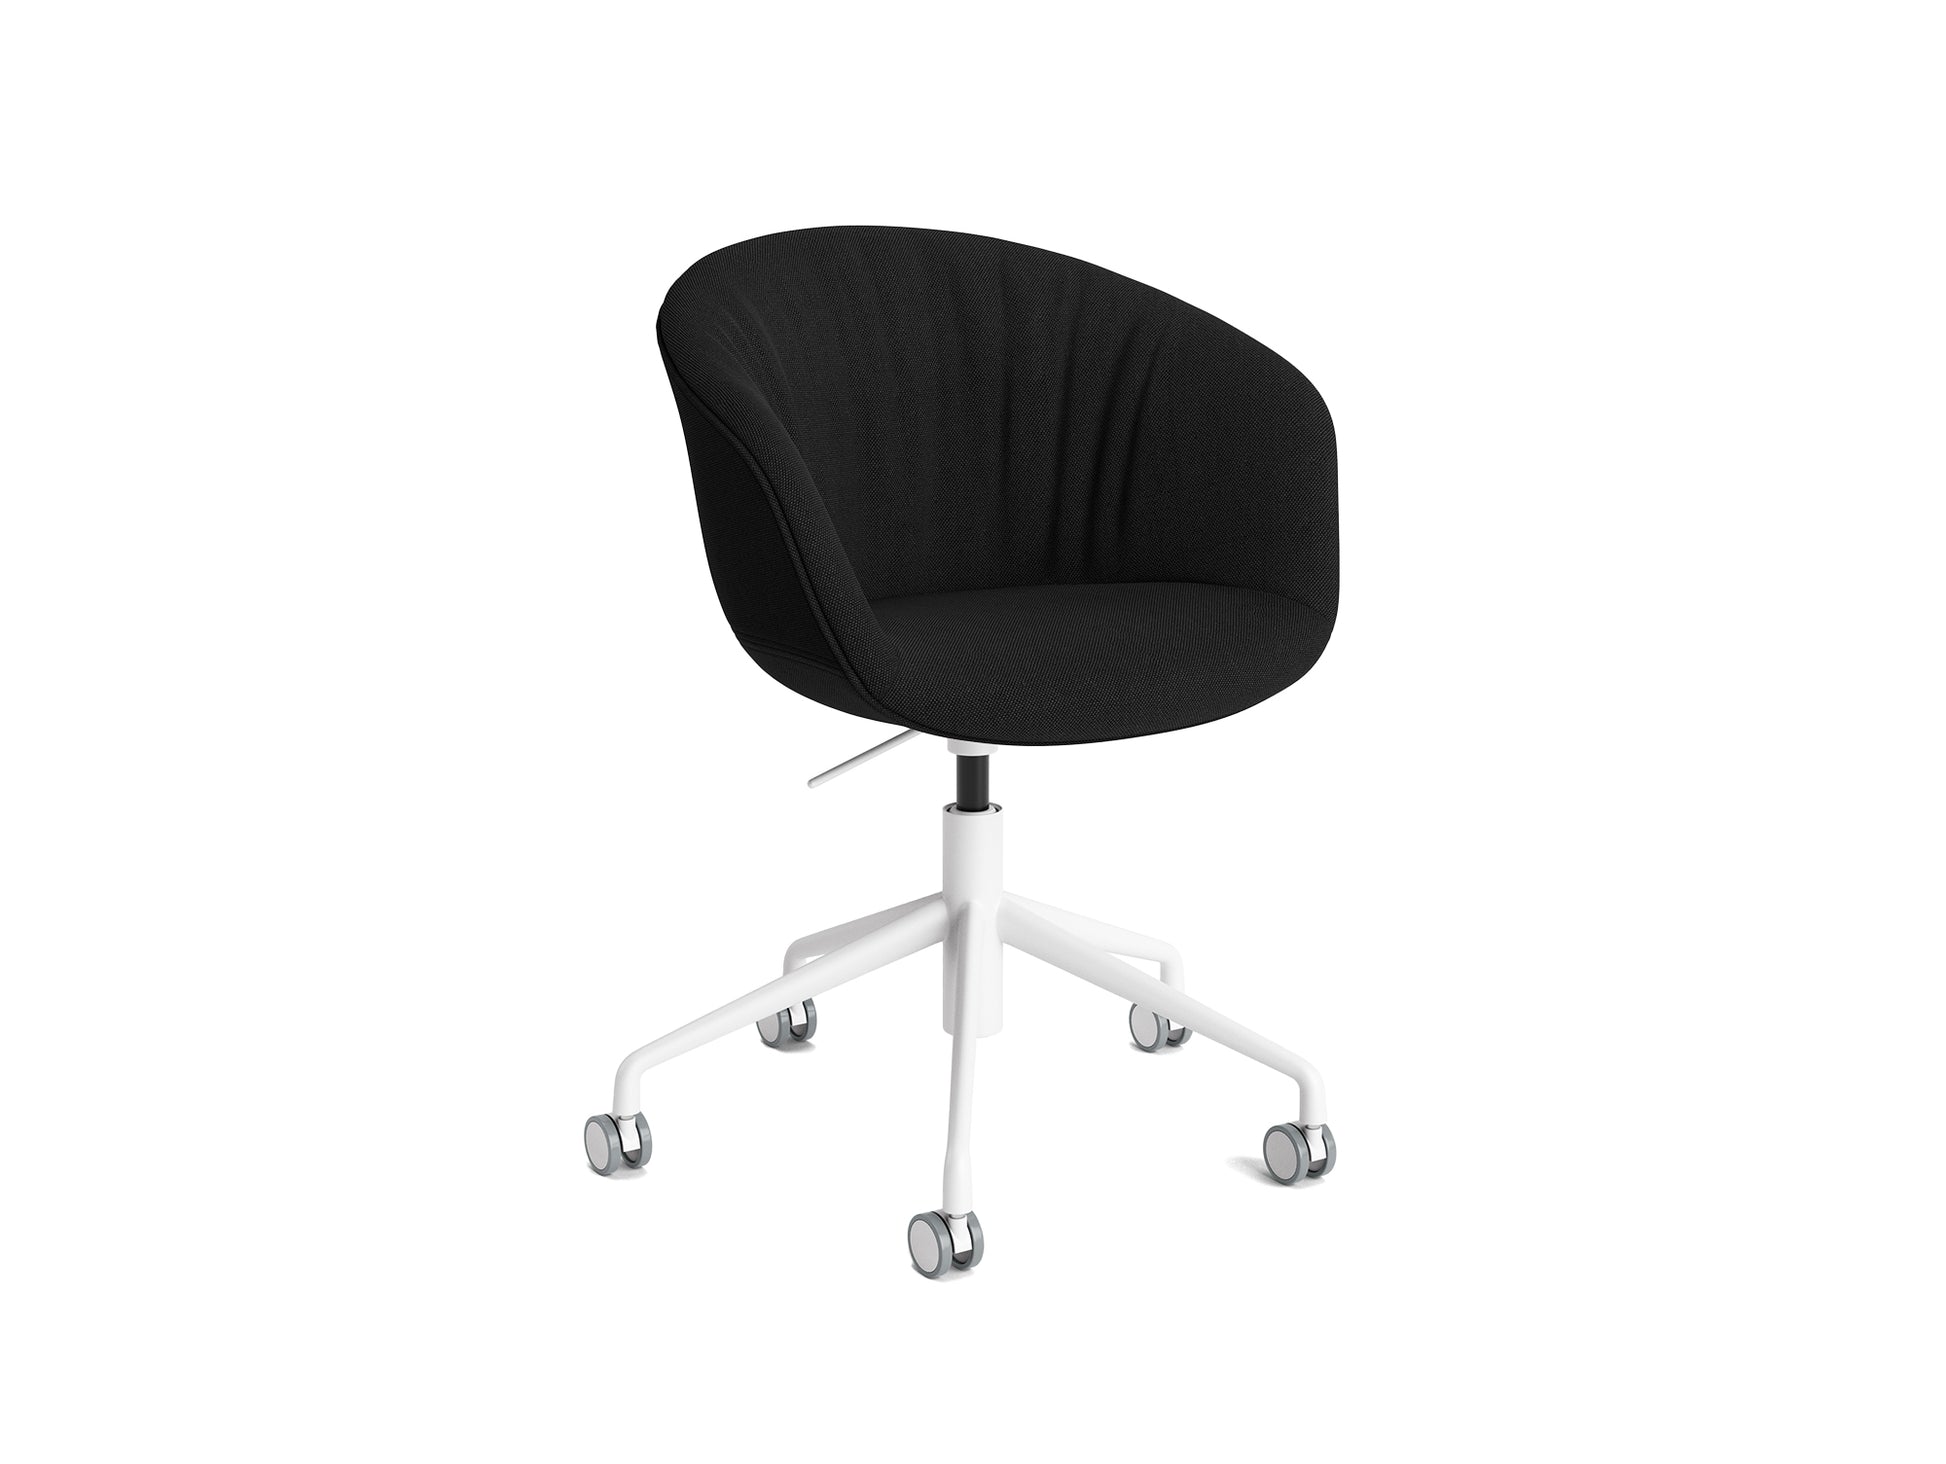 About A Chair AAC 53 Soft by HAY - Steelcut 3 190 / White Powder Coated Aluminium